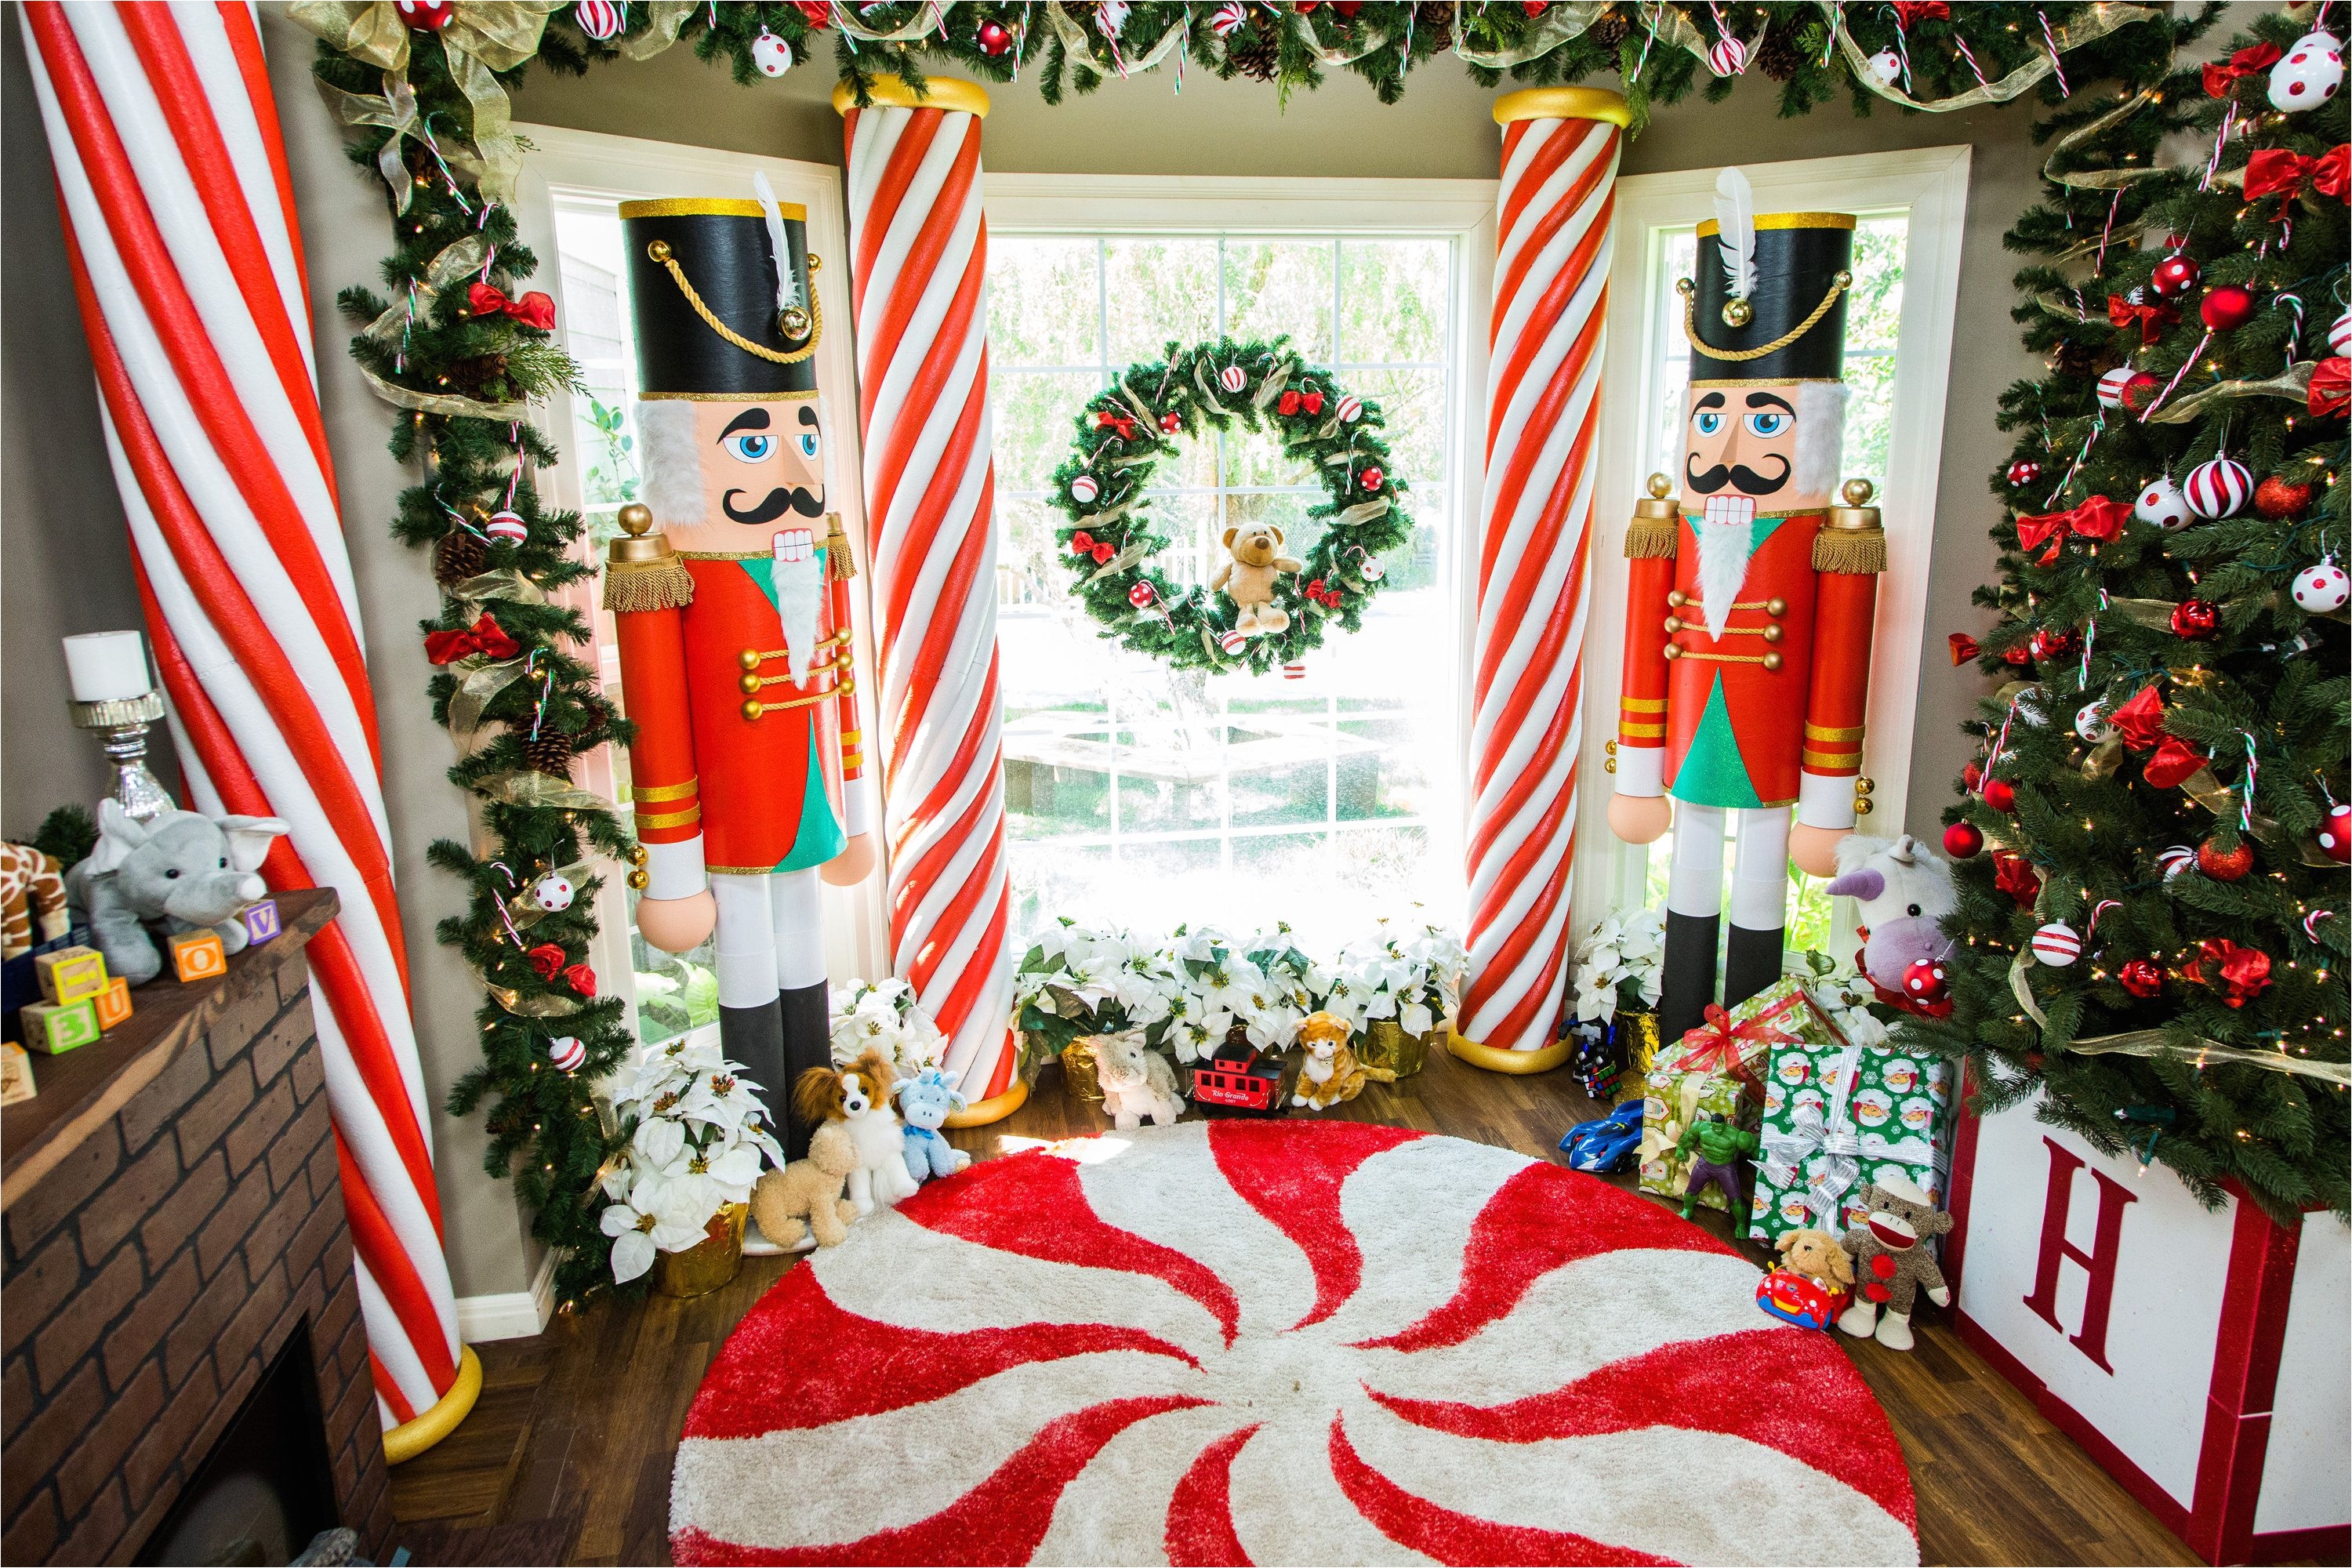 decorate your home with diy candy cane pillars by ken wingard paige hemmis don t miss home family weekdays at 10a 9c on hallmark channel